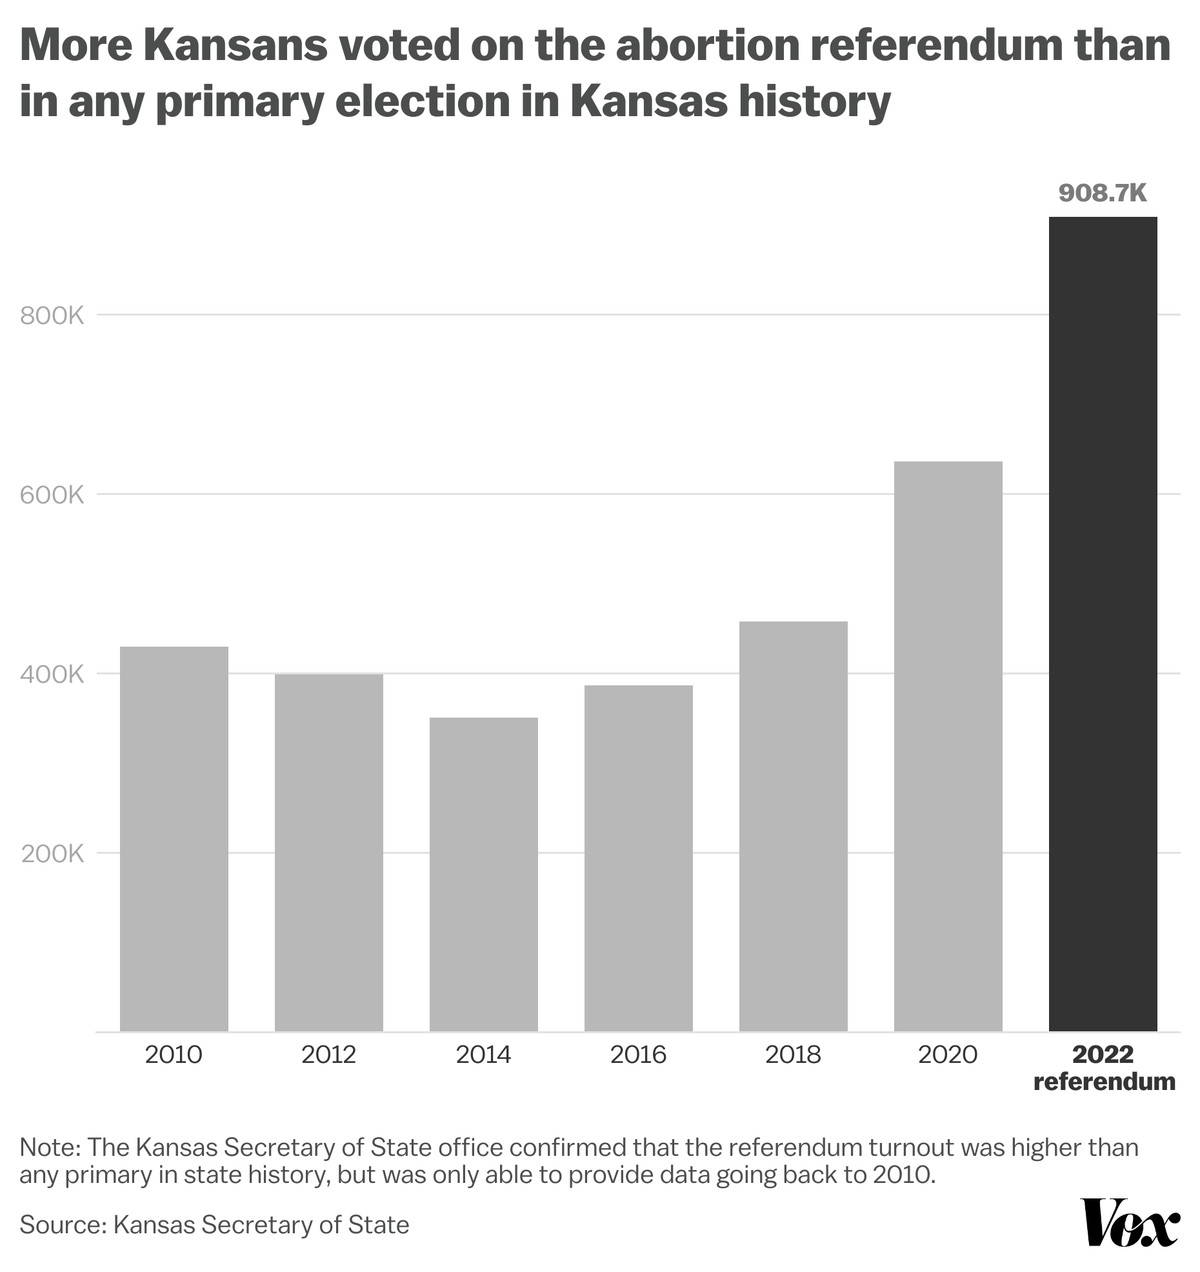 More Kansans voted on the abortion referendum than in any primary election in Kansas history